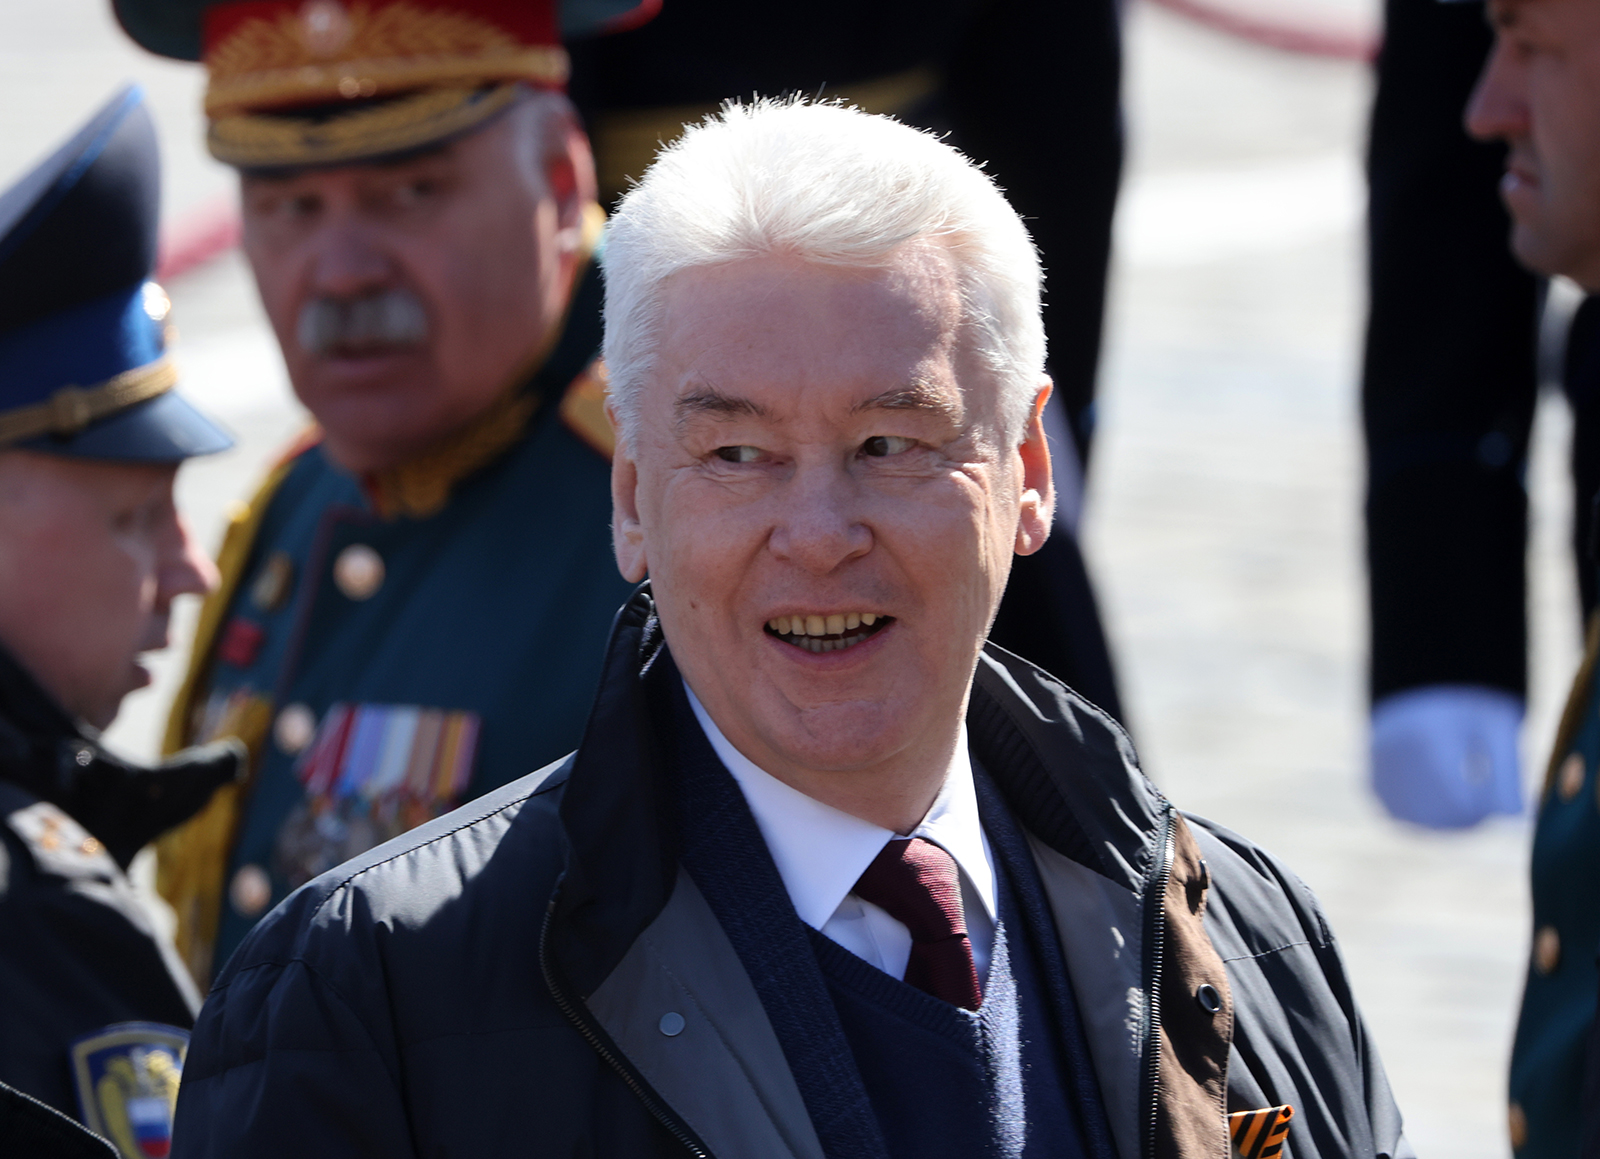 Moscow's Mayor Sergei Sobyanin visits the Victory Day Red Square Parade in Moscow, Russia on May 9.